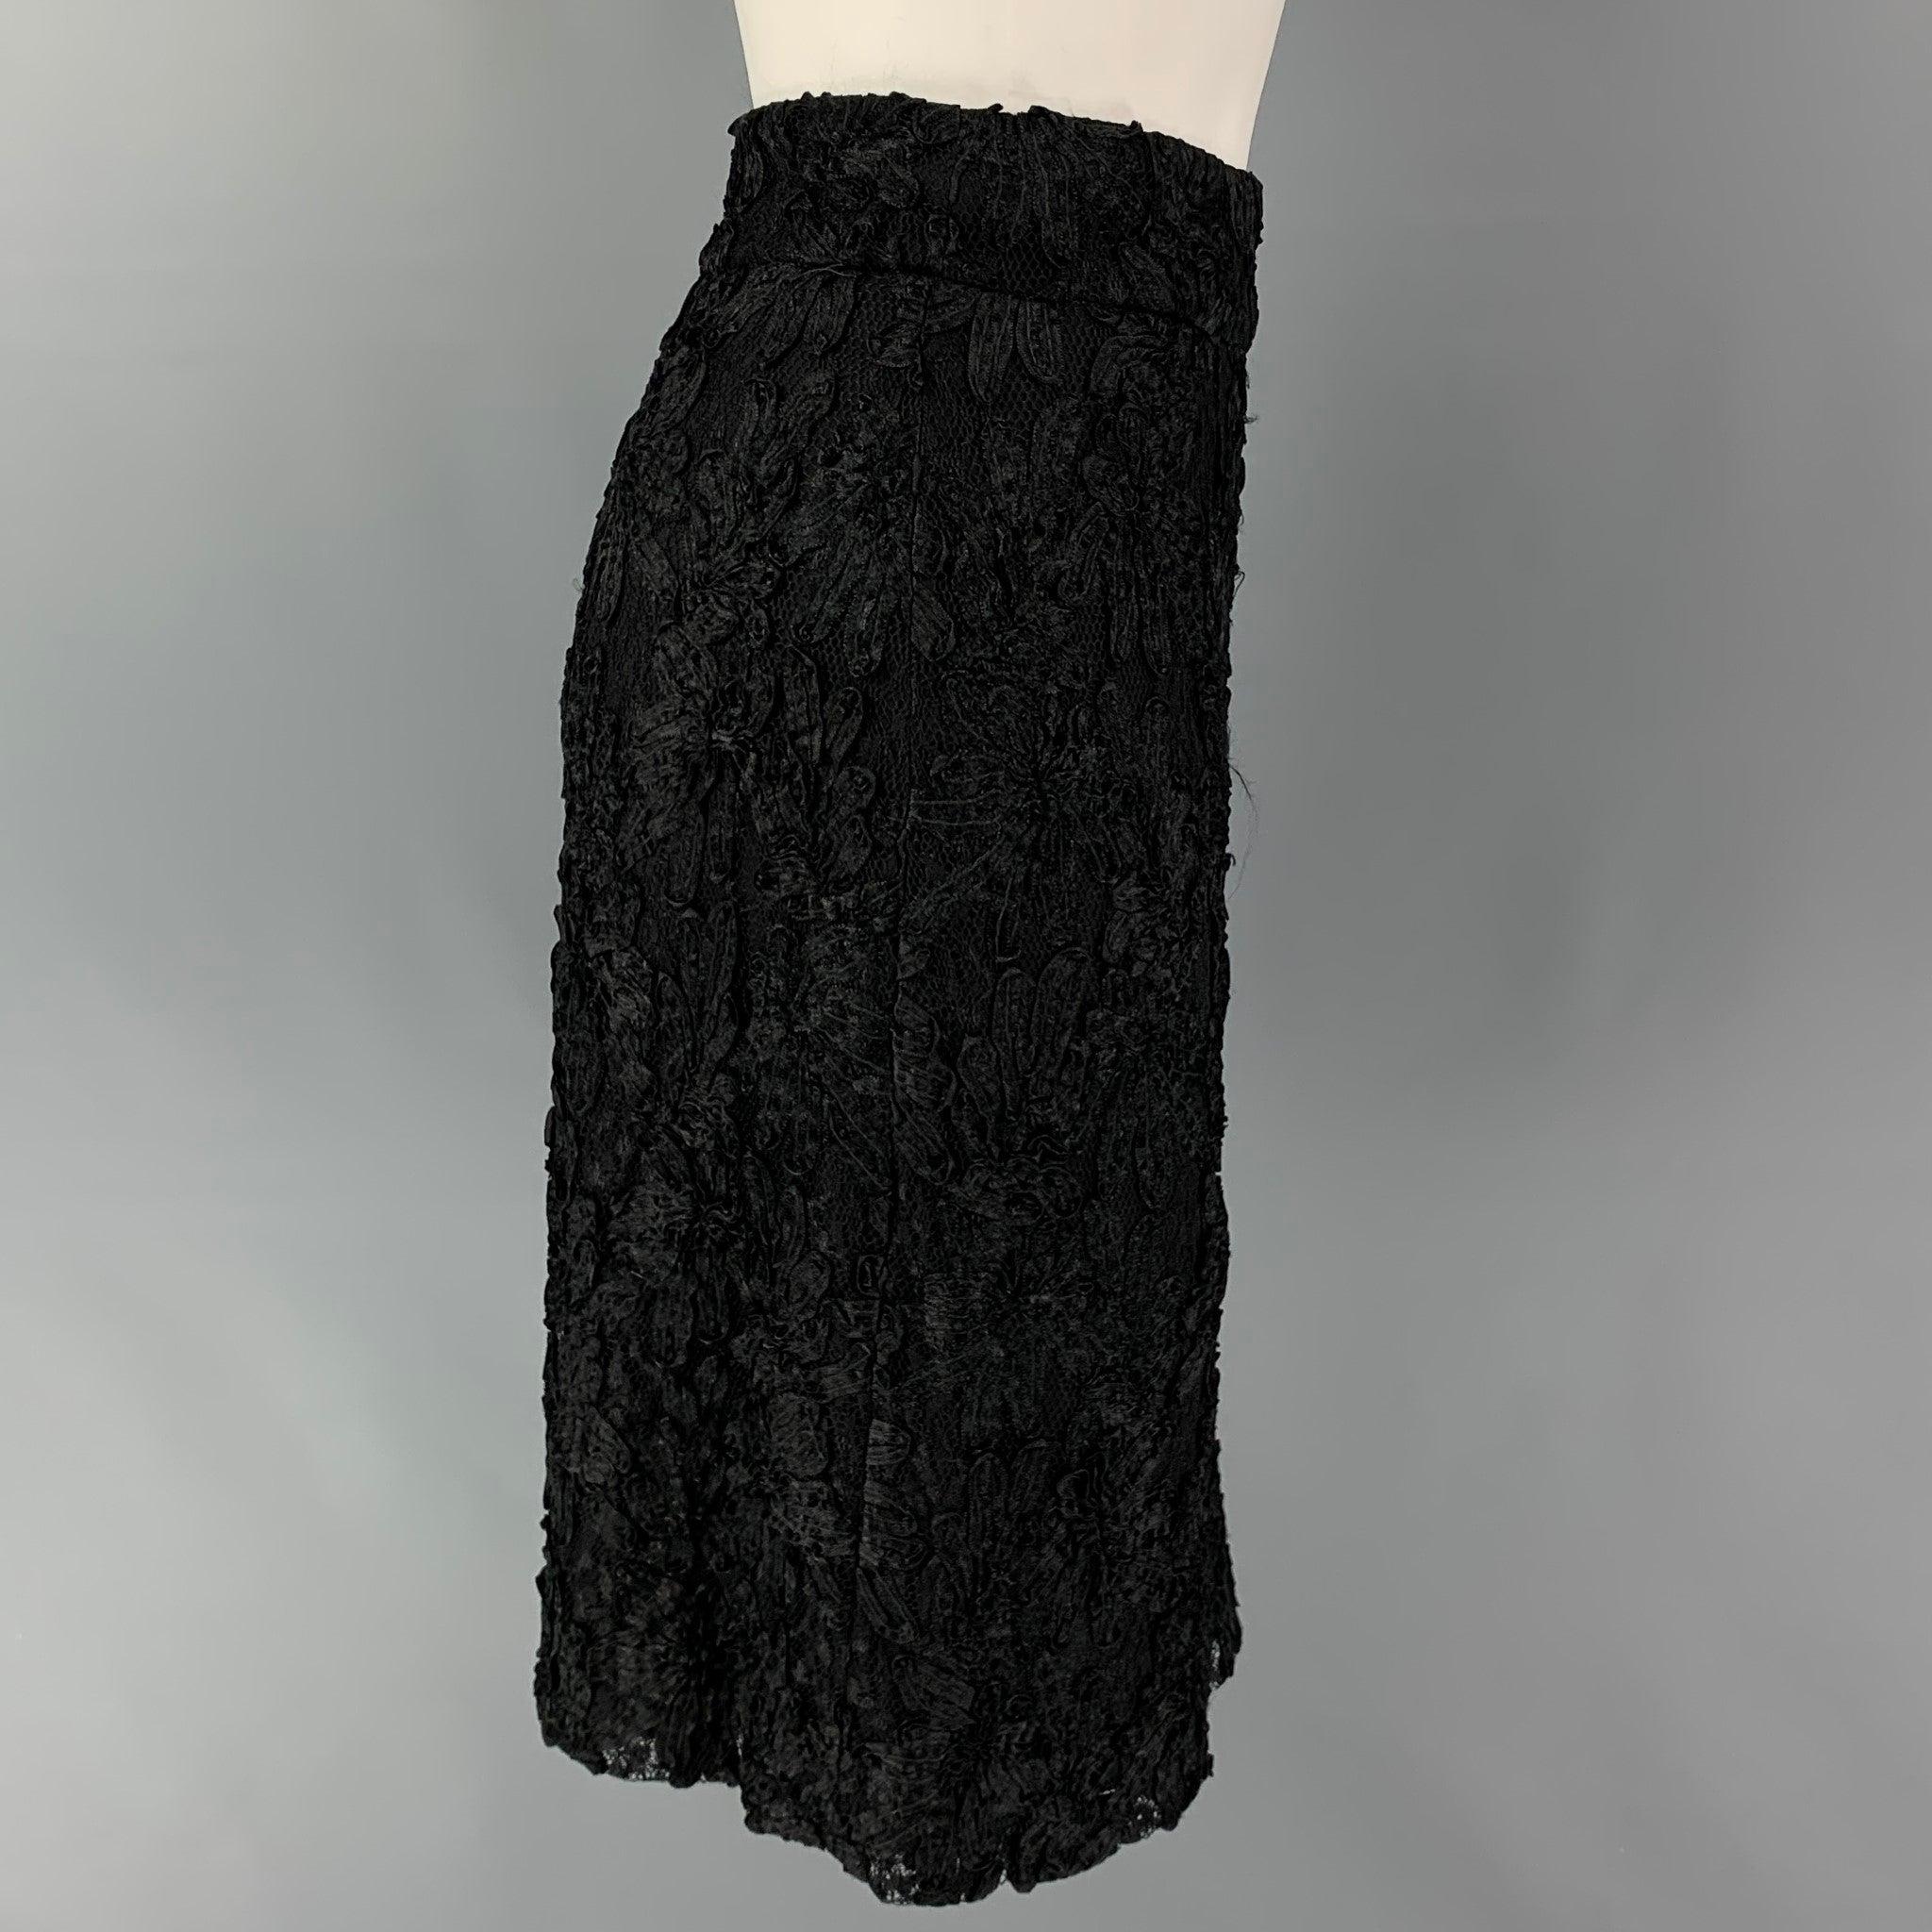 BURBERRY PRORSUM skirt comes in a black rayon / polyamide featuring a pencil style, guipure lace design, and a side zipper closure. Made in Italy.
Very Good
Pre-Owned Condition. 

Marked:   40 

Measurements: 
  Waist: 27 inches  Hip: 38 inches 